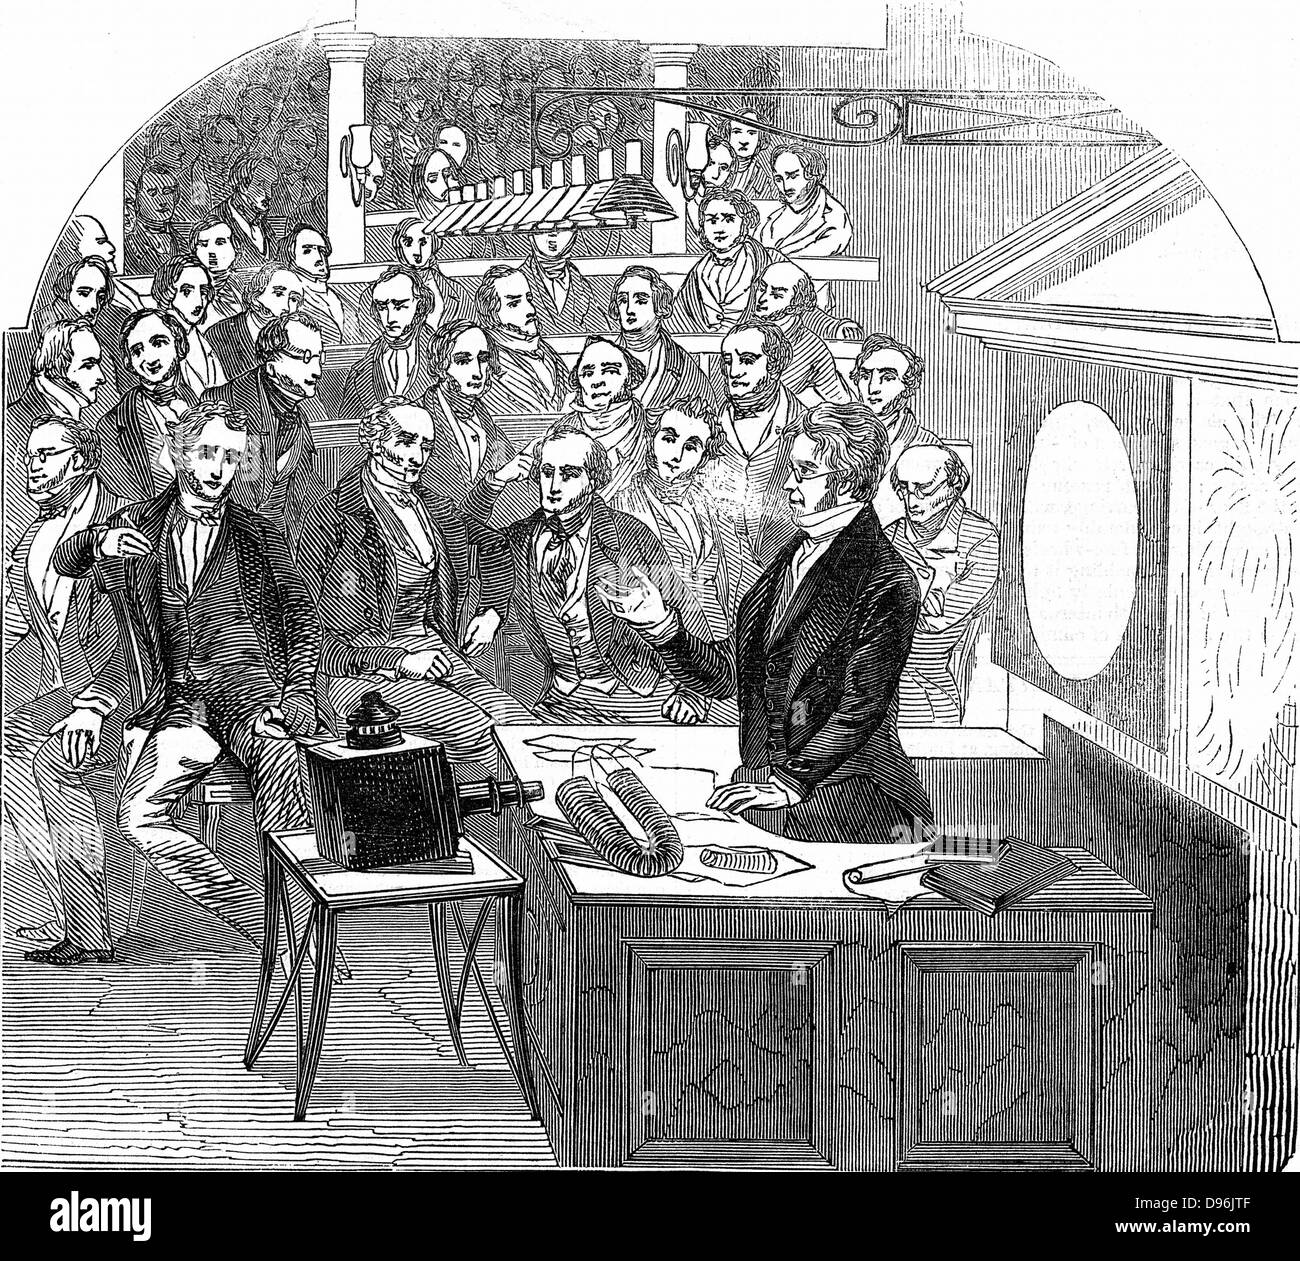 Michael Faraday (1791-1867) British chemist and physicist, lecturing on electricity and magnetism Royal Institution, London, 23 January 1846. Wood engraving. Stock Photo